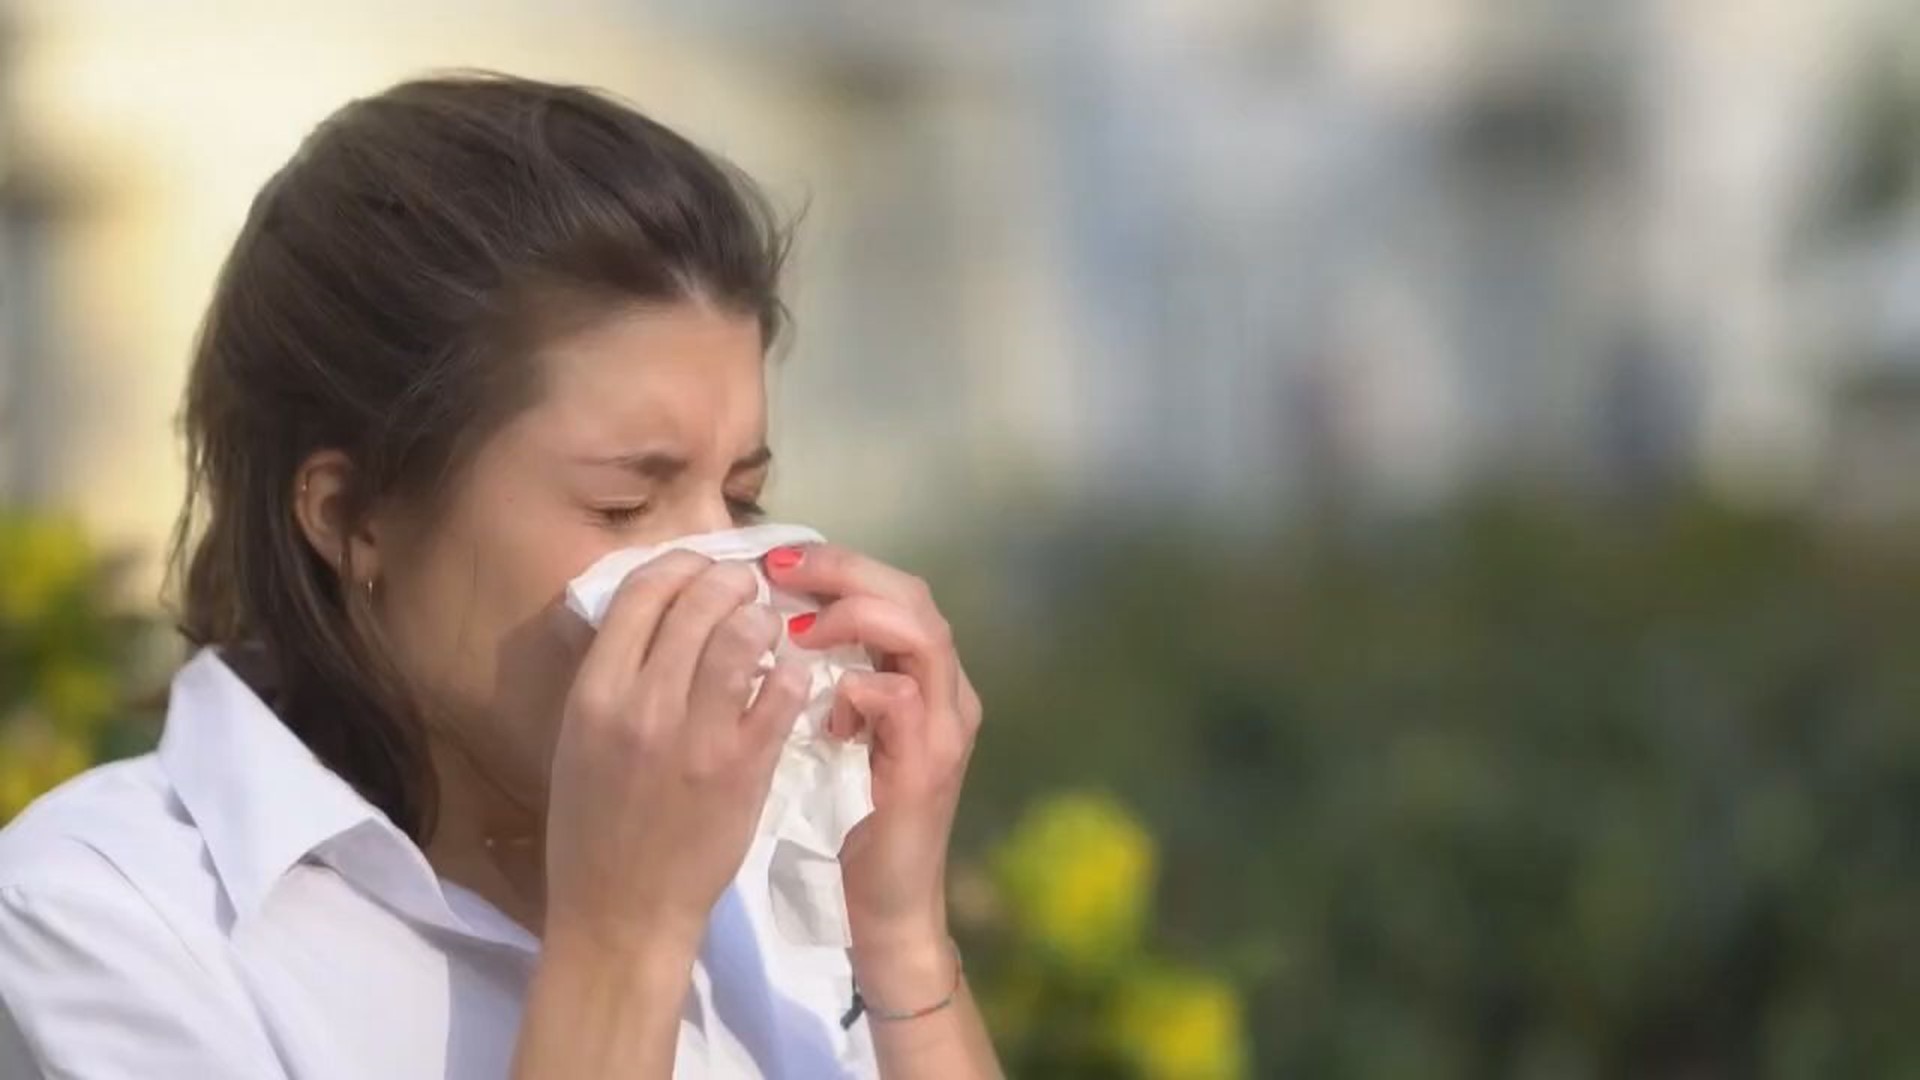 Sneezing, coughing and sore throats are expected to come back earlier, said doctors.